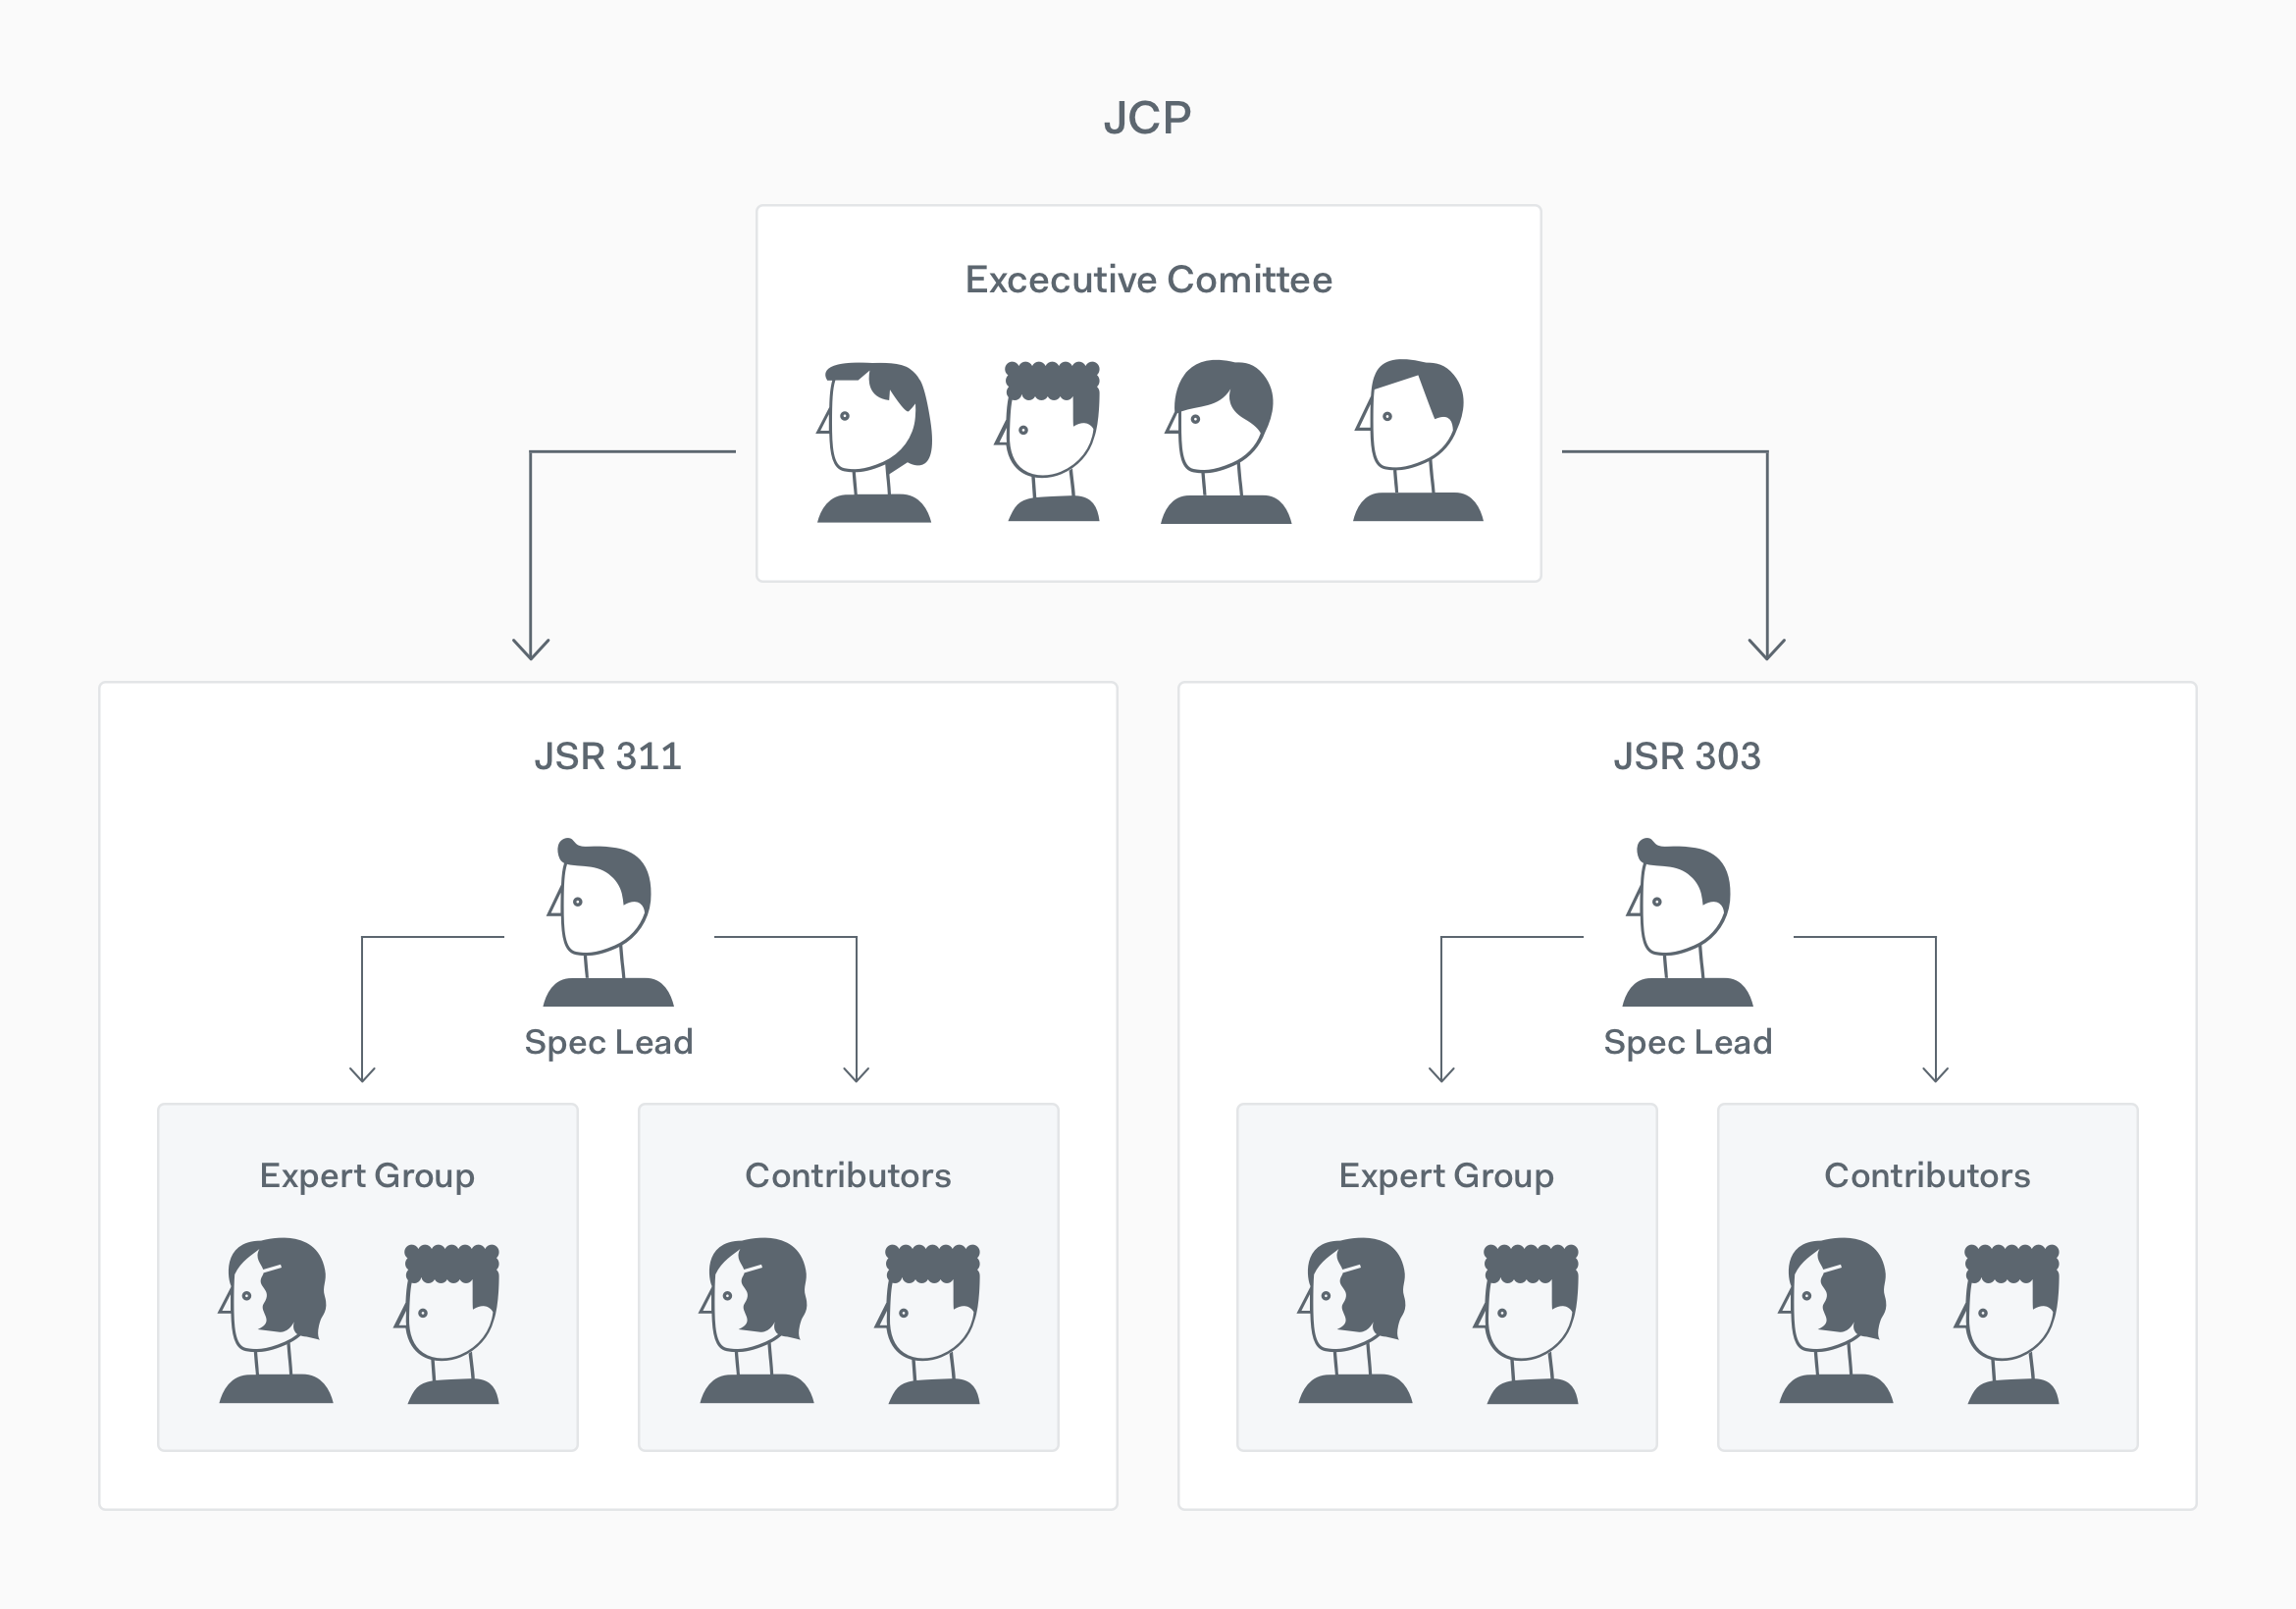 JCP members hierarchy